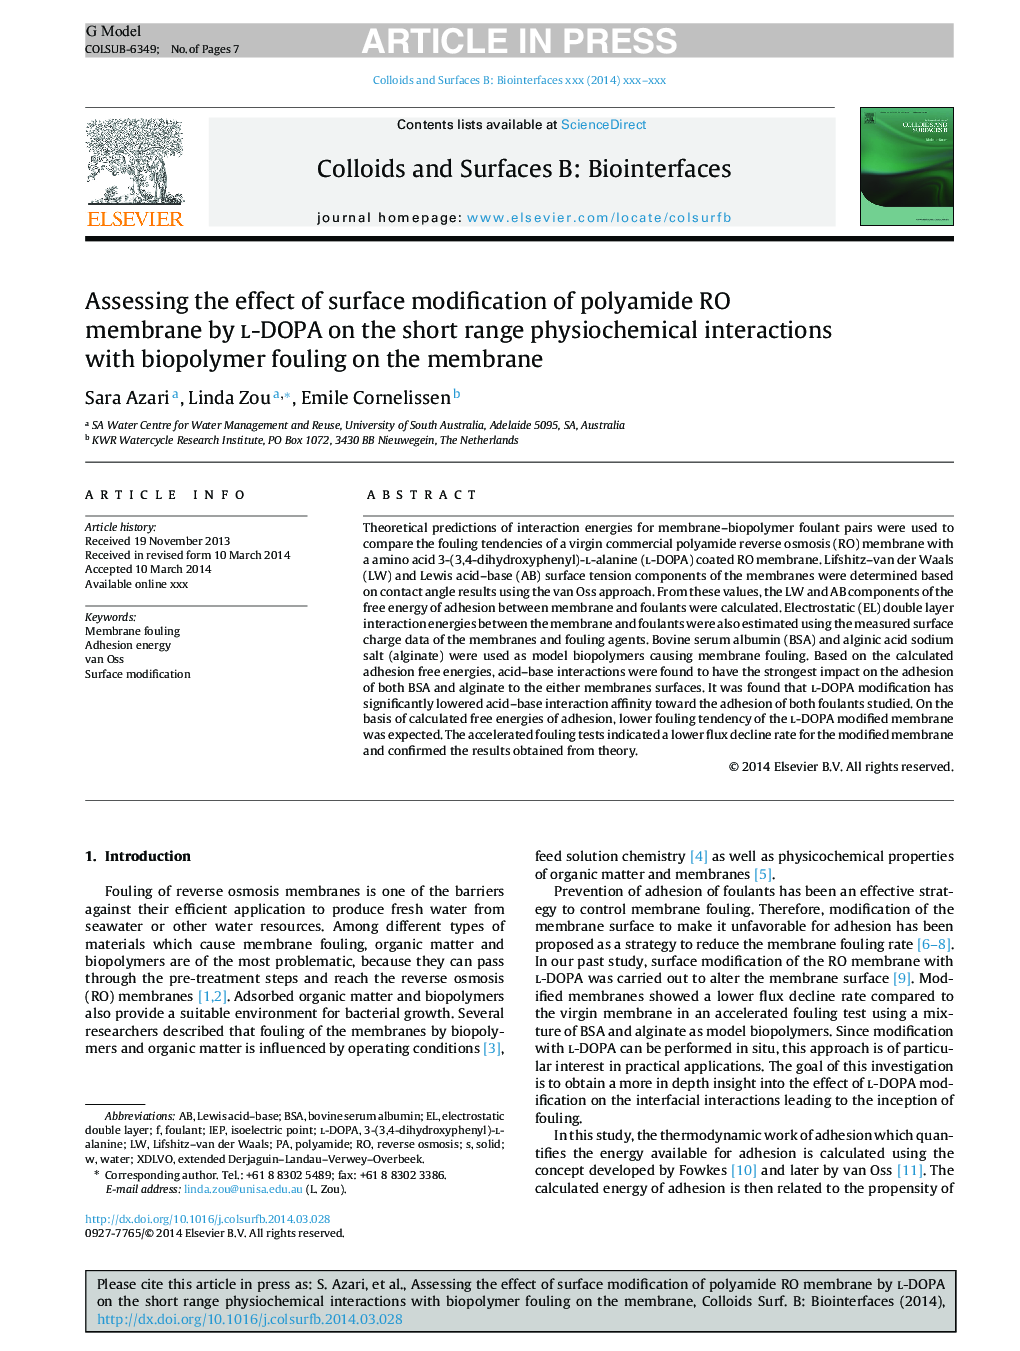 Assessing the effect of surface modification of polyamide RO membrane by l-DOPA on the short range physiochemical interactions with biopolymer fouling on the membrane